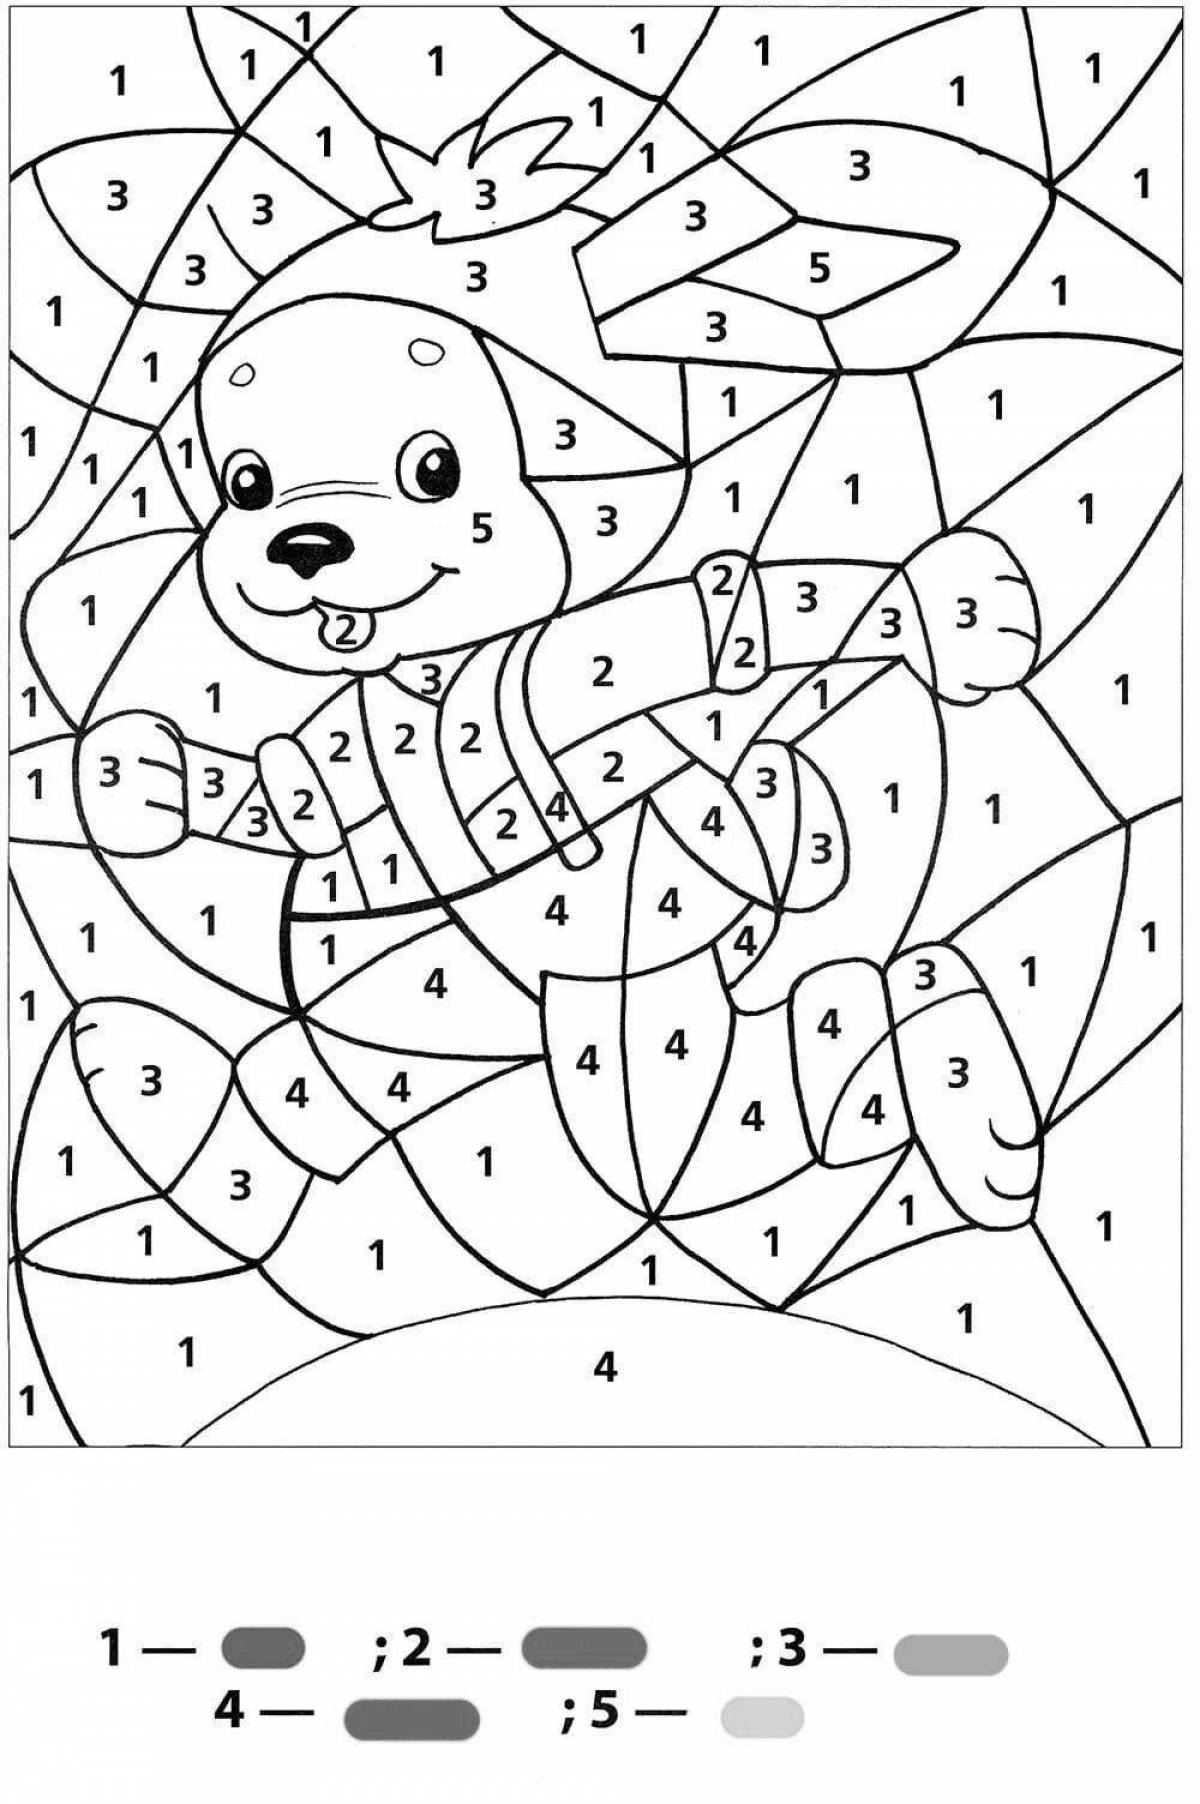 Exciting 6 Years in Numbers coloring book